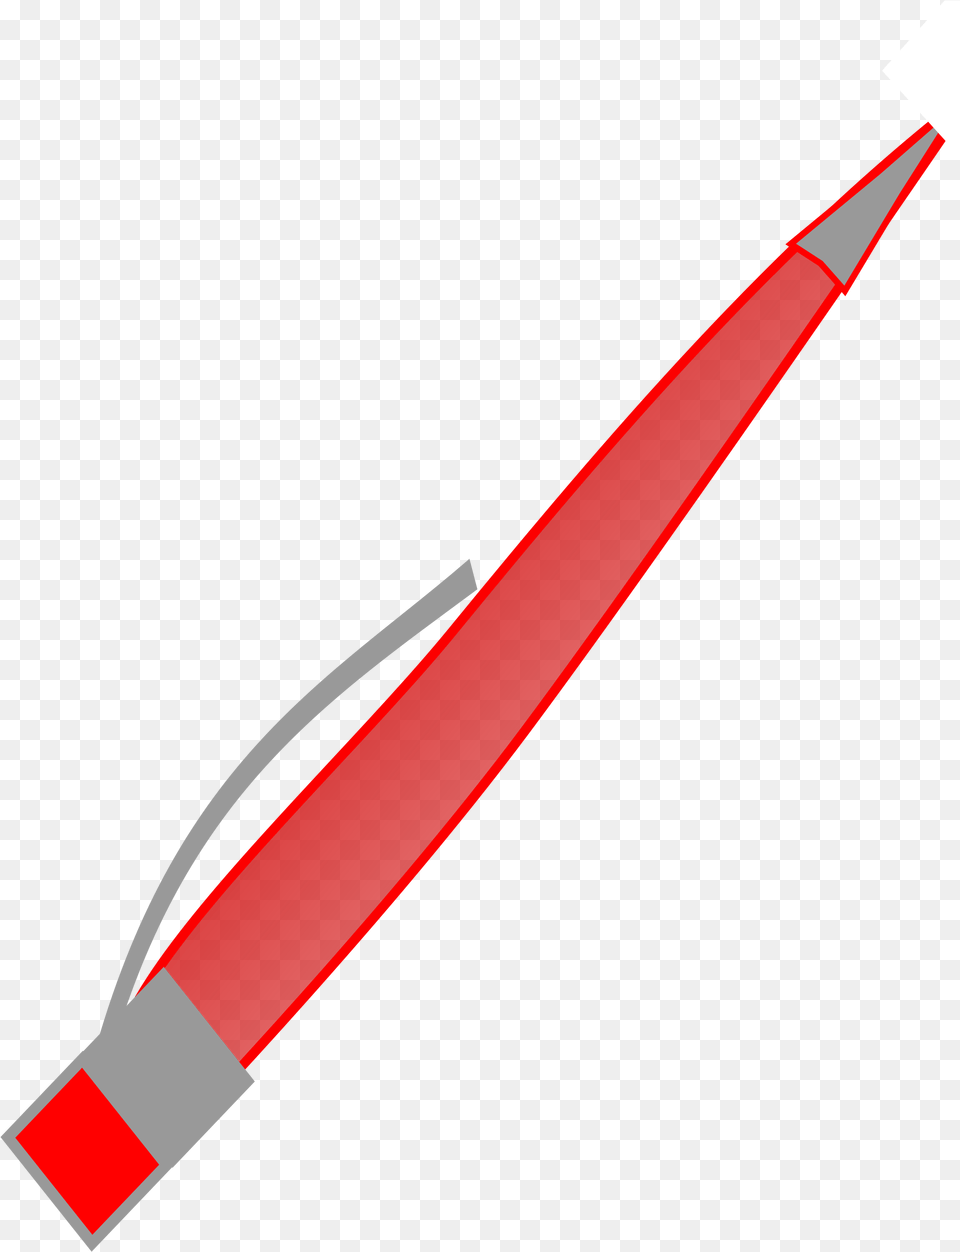 This Icons Design Of Hand Made Pen, Blade, Dagger, Knife, Weapon Png Image